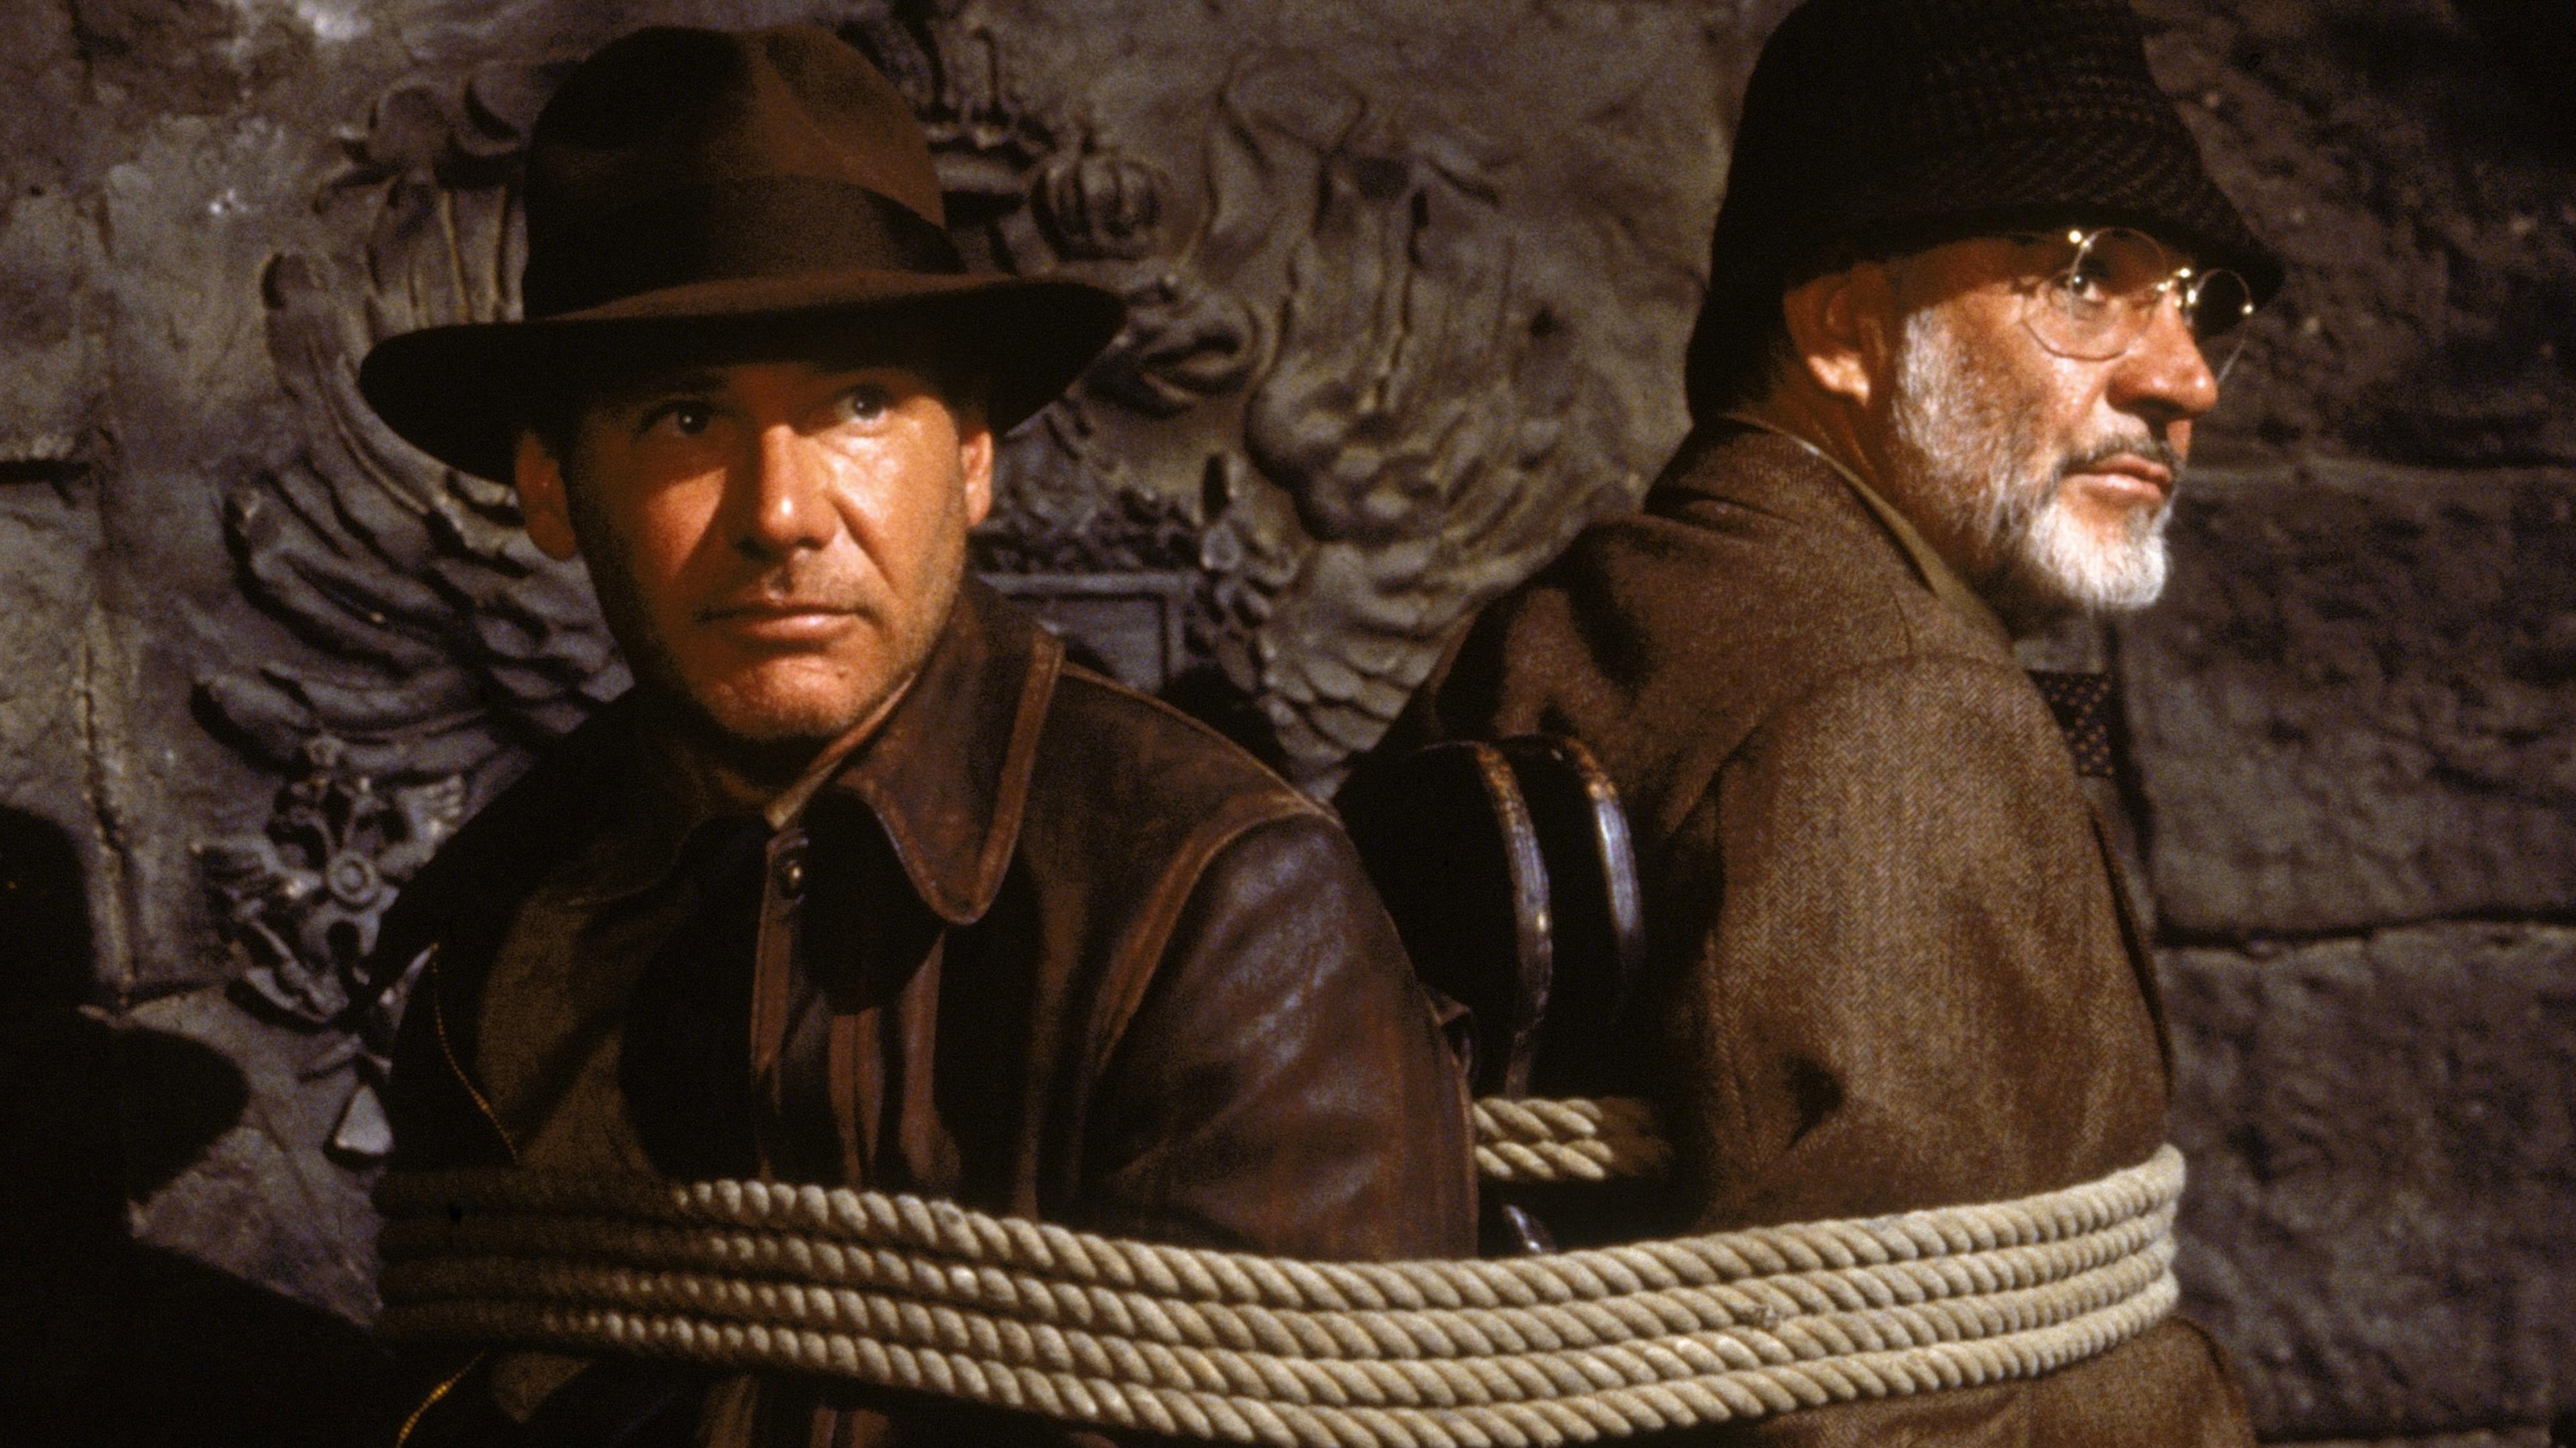 Harrison Ford and Sean Connery in Indiana Jones 5.